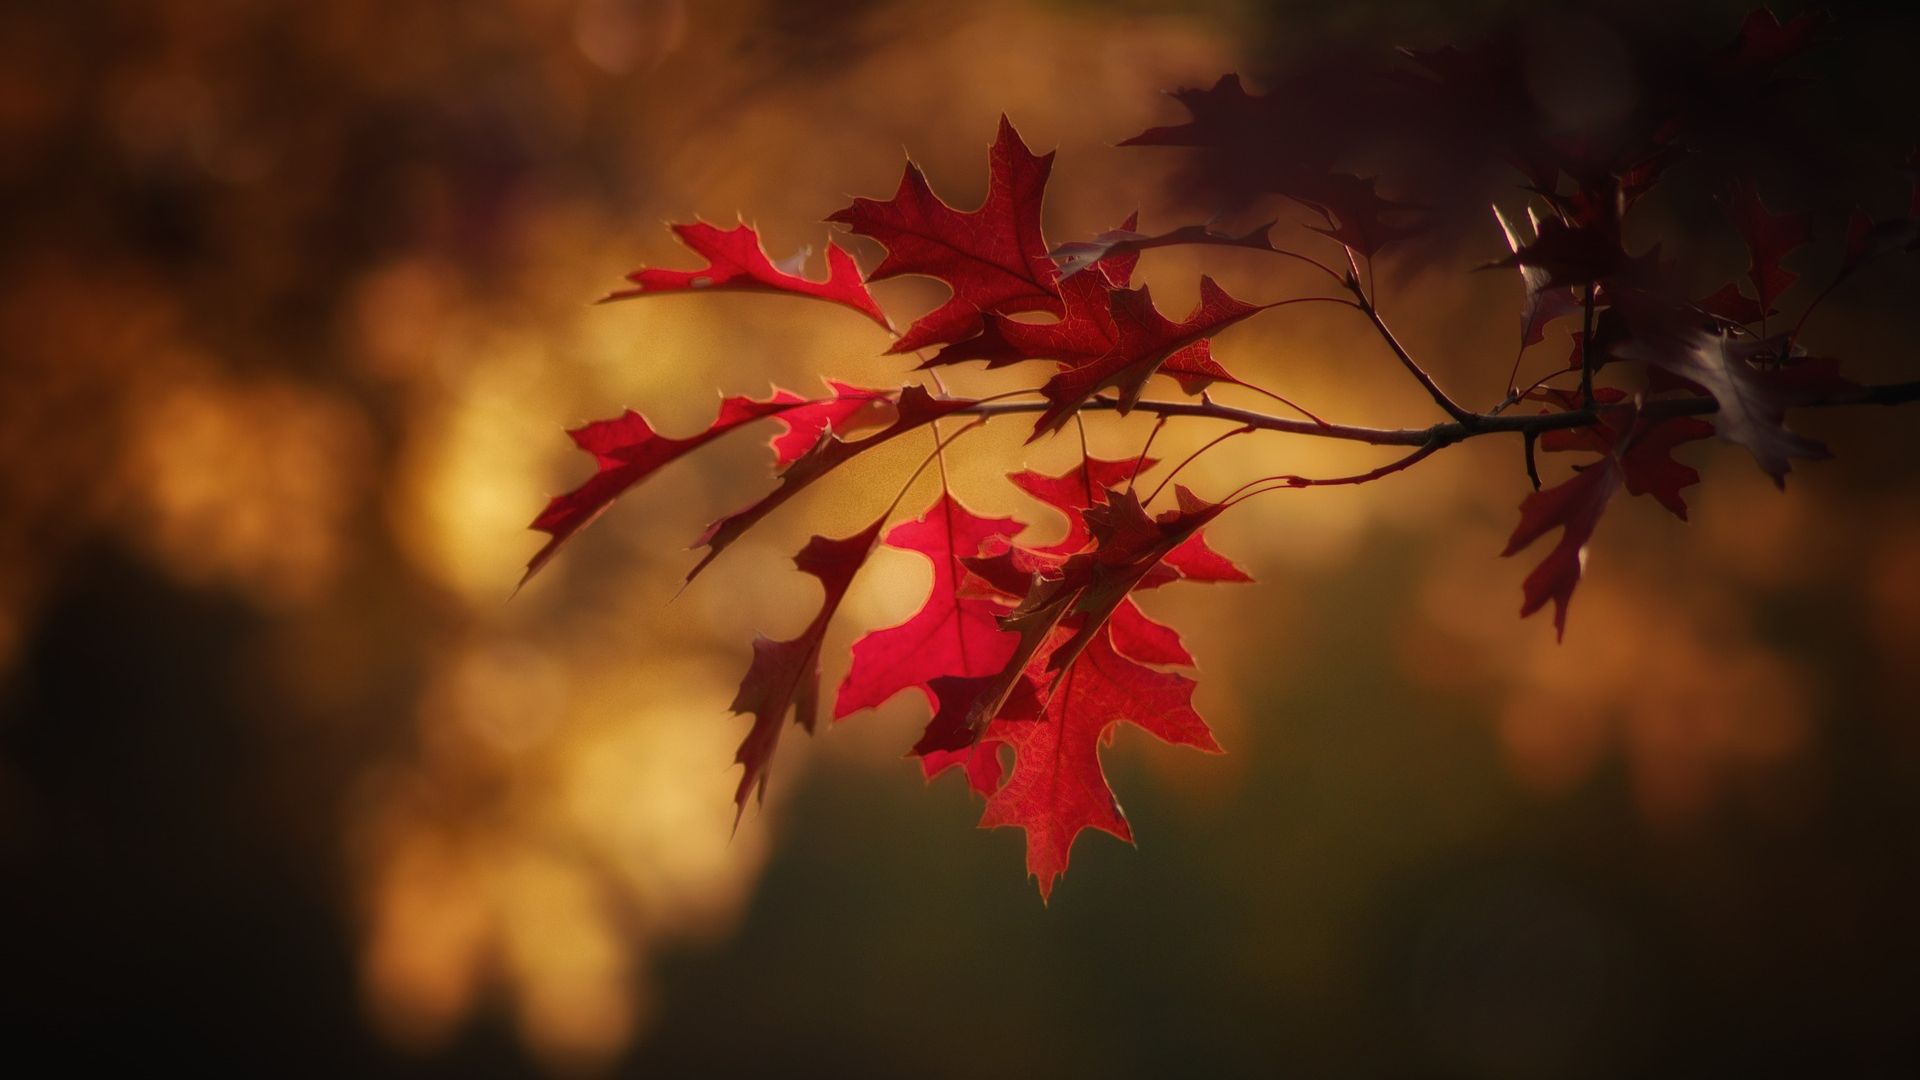 Autumn Red Leaves With Blurred Background - Autumn Red Leaves Background - HD Wallpaper 